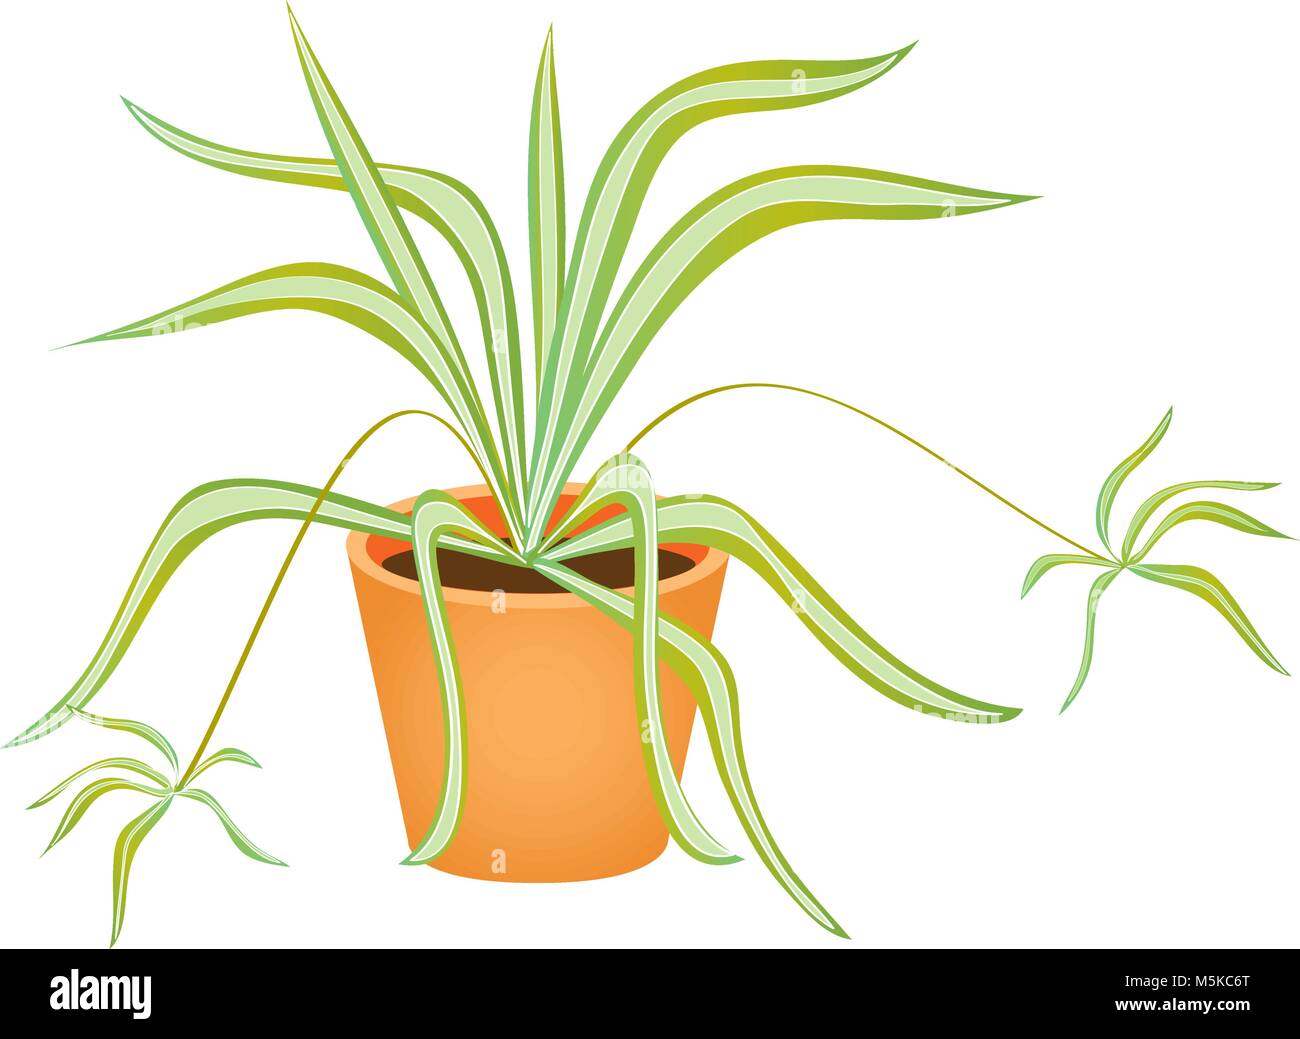 A cartoon of a plant in a terracota plant pot Stock Image & Art - Alamy